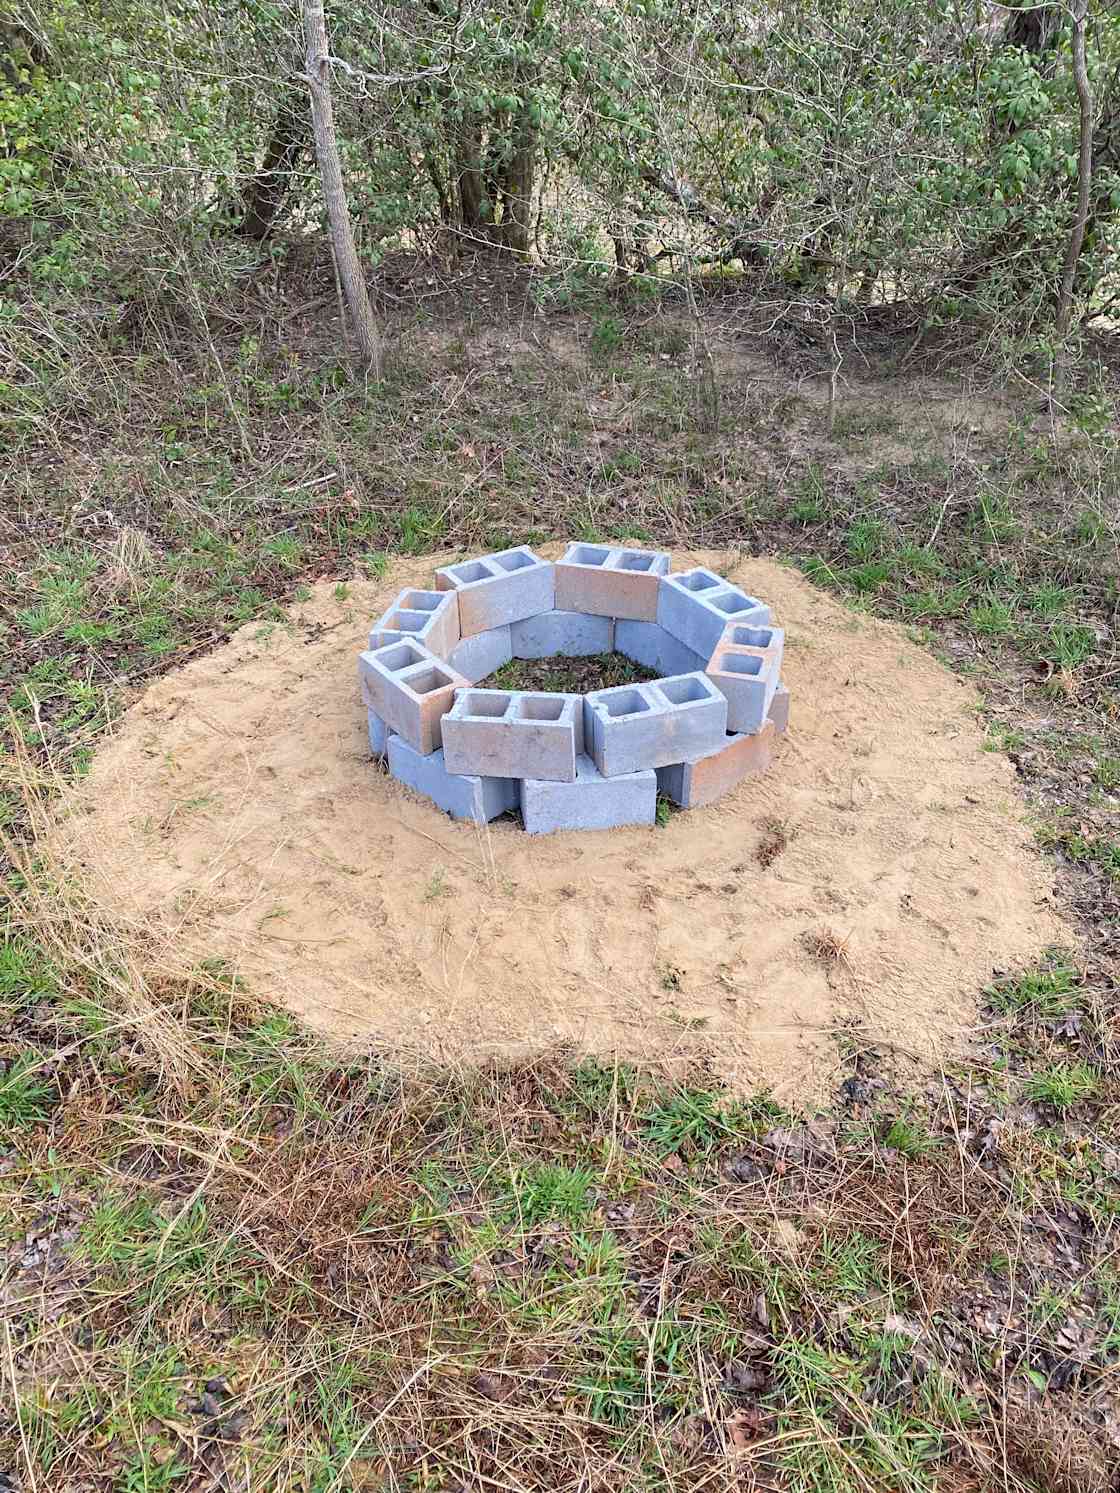 Fire ring near the river for safe and fun campfires!